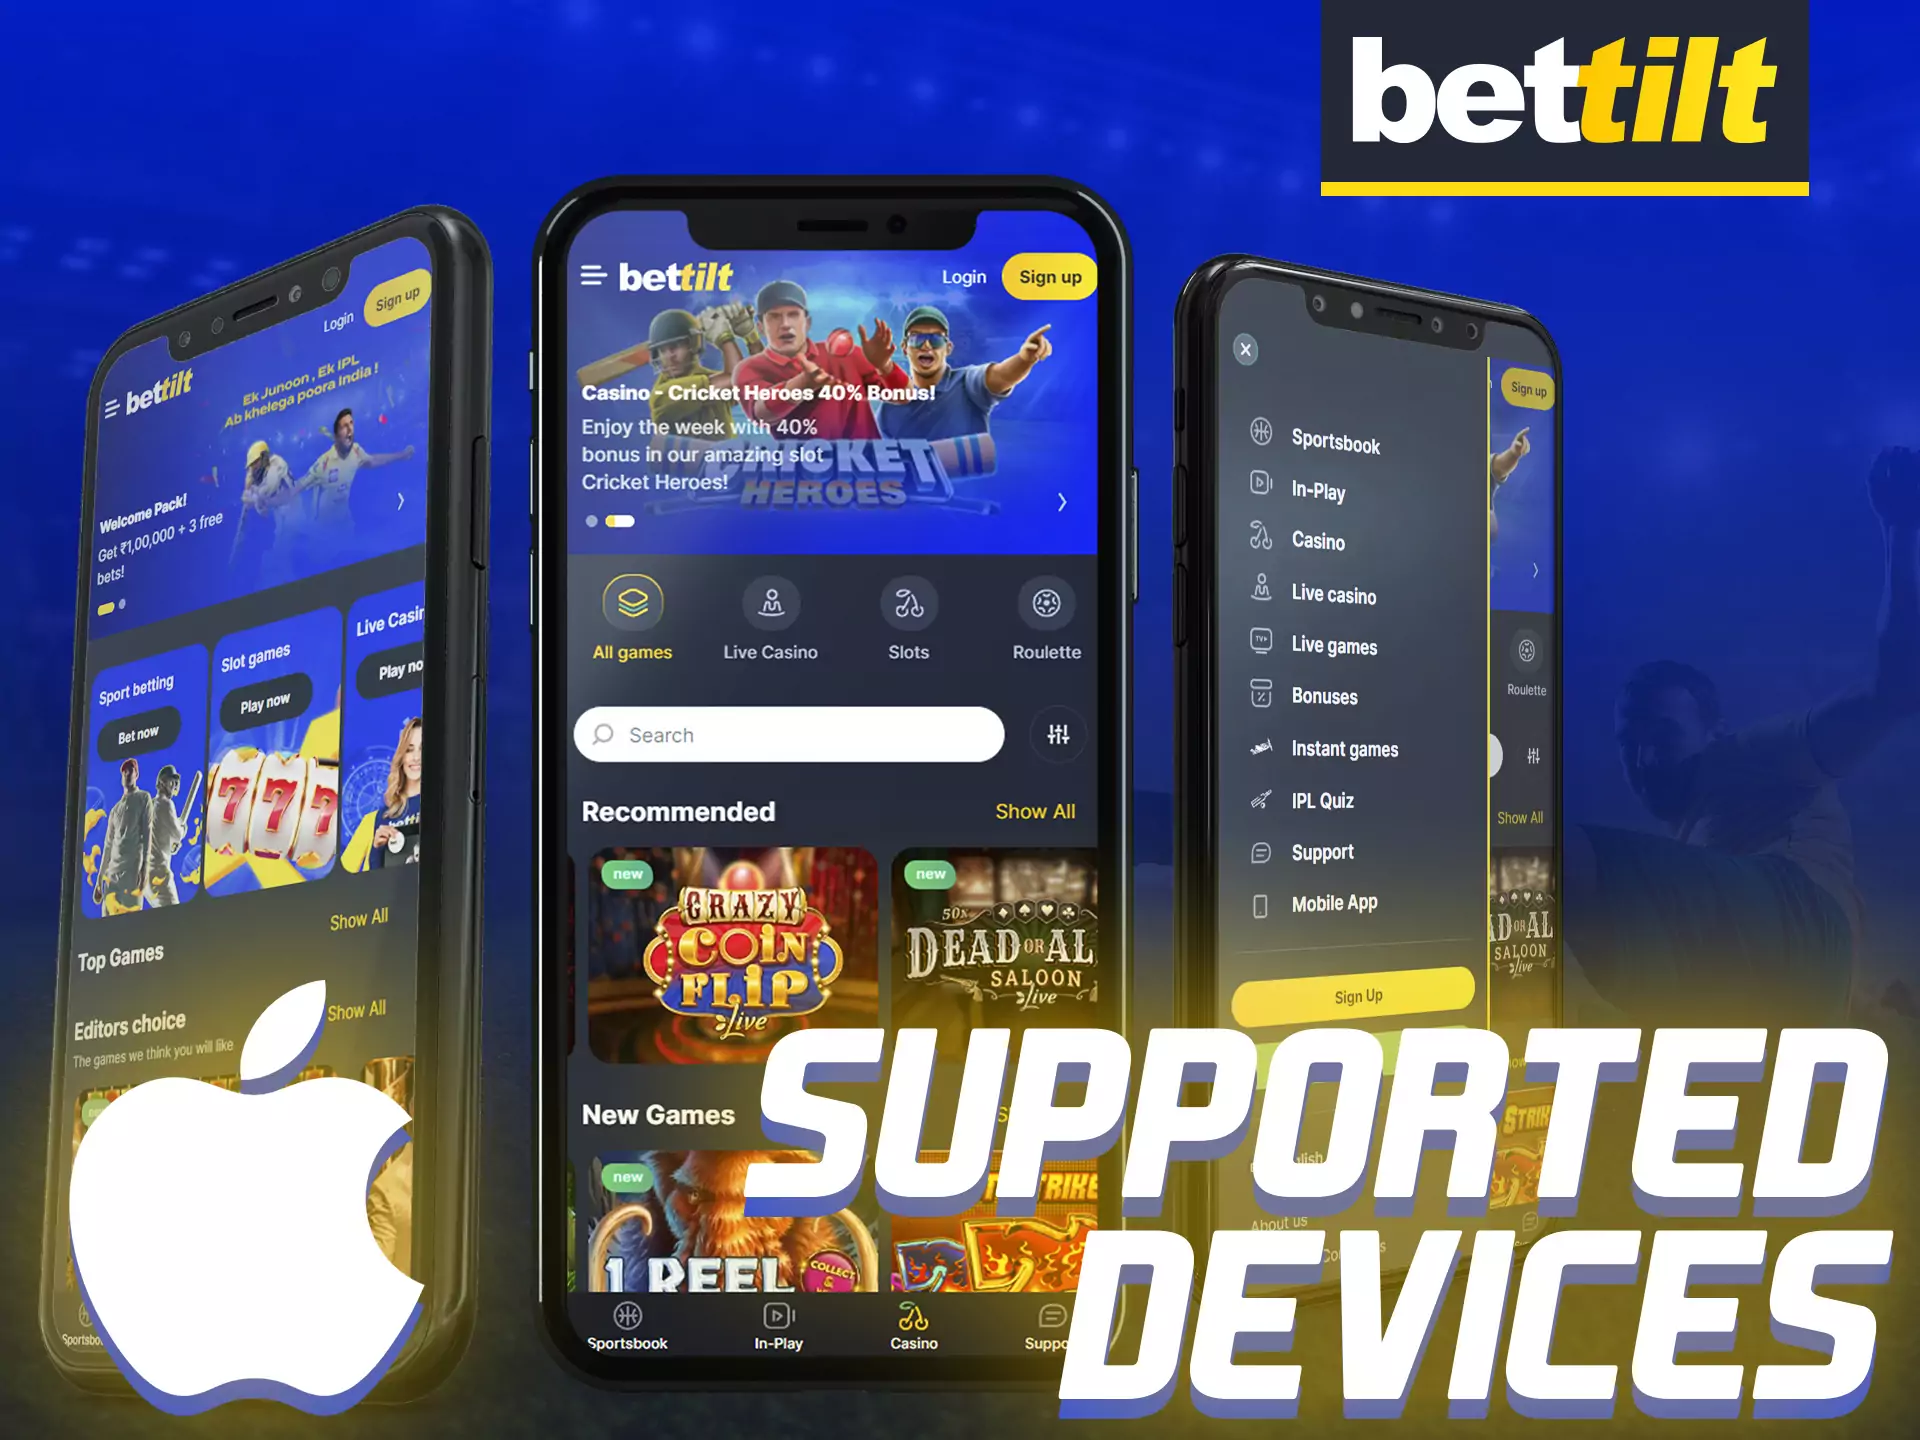 The Bettilt app is supported on a variety of iOS devices.